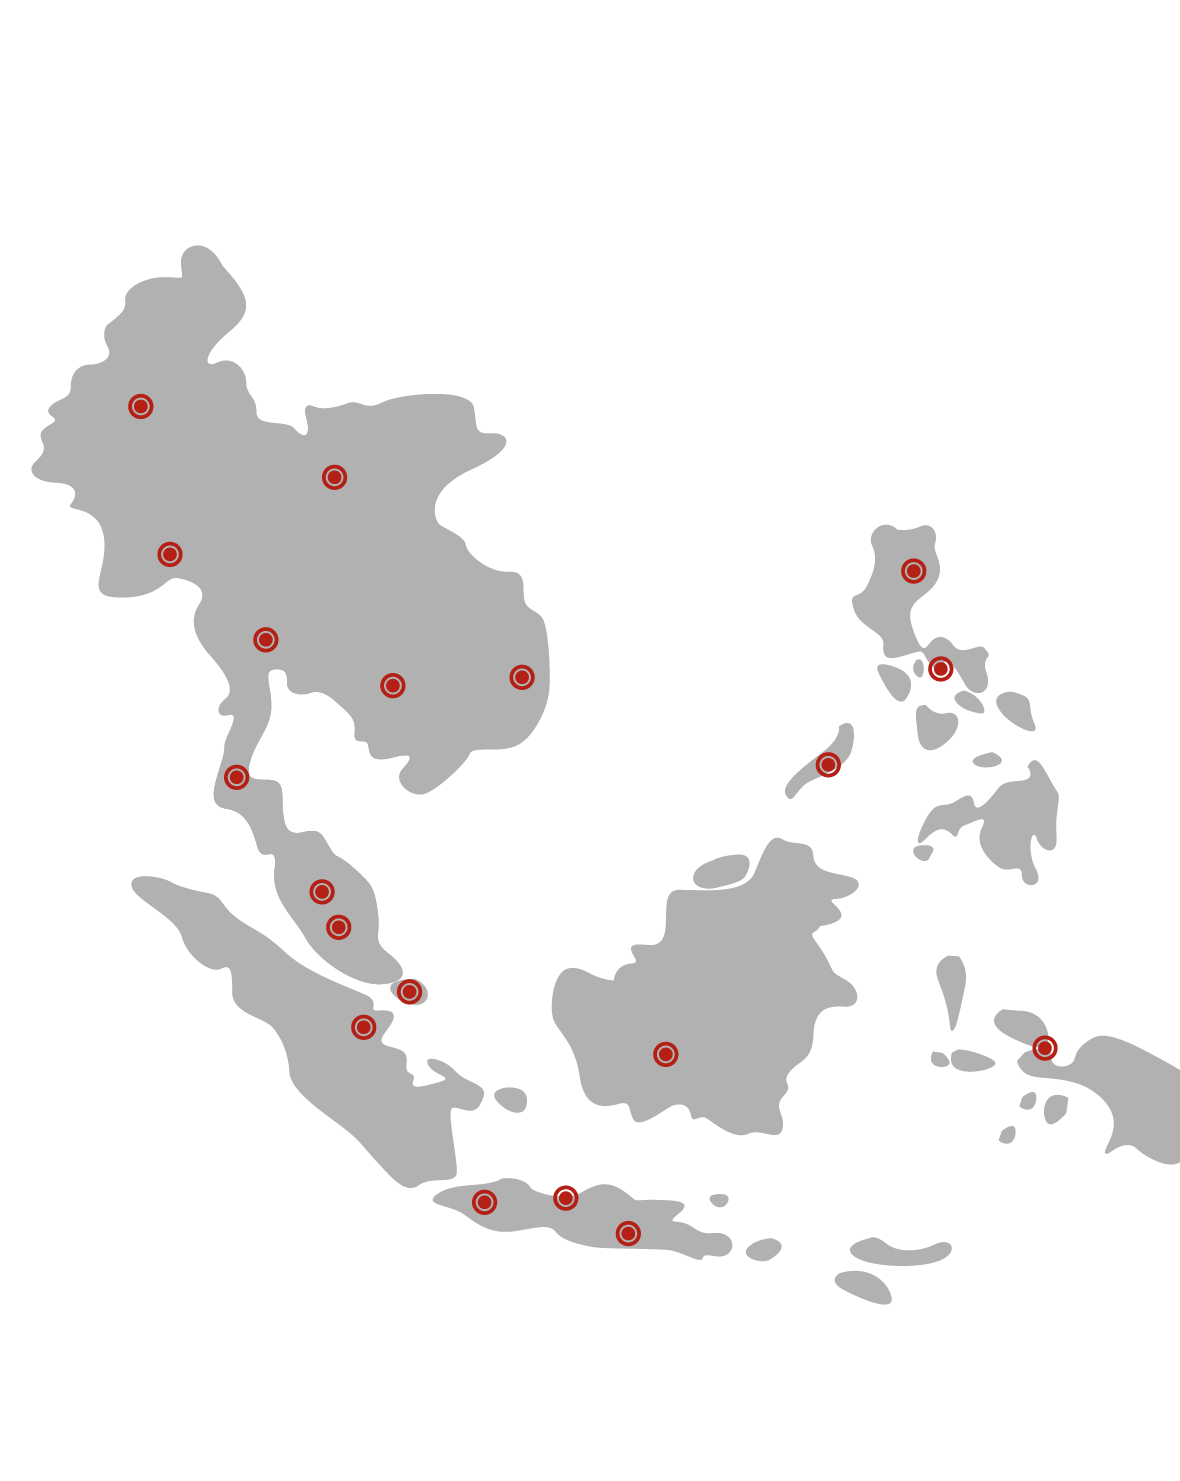 deep infrastructure in southeast asia